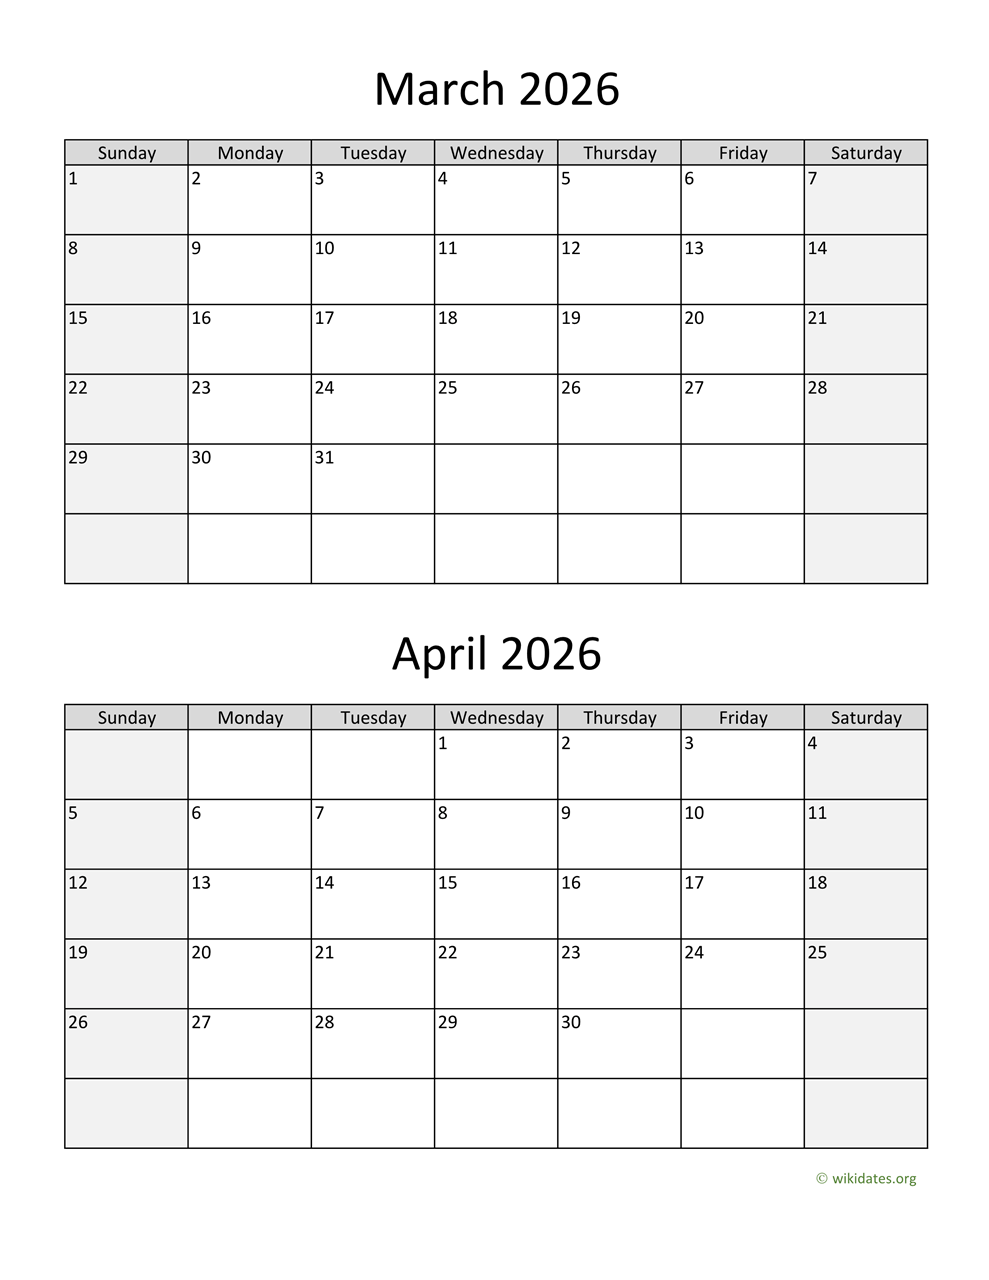 March and April 2026 Calendar WikiDates org